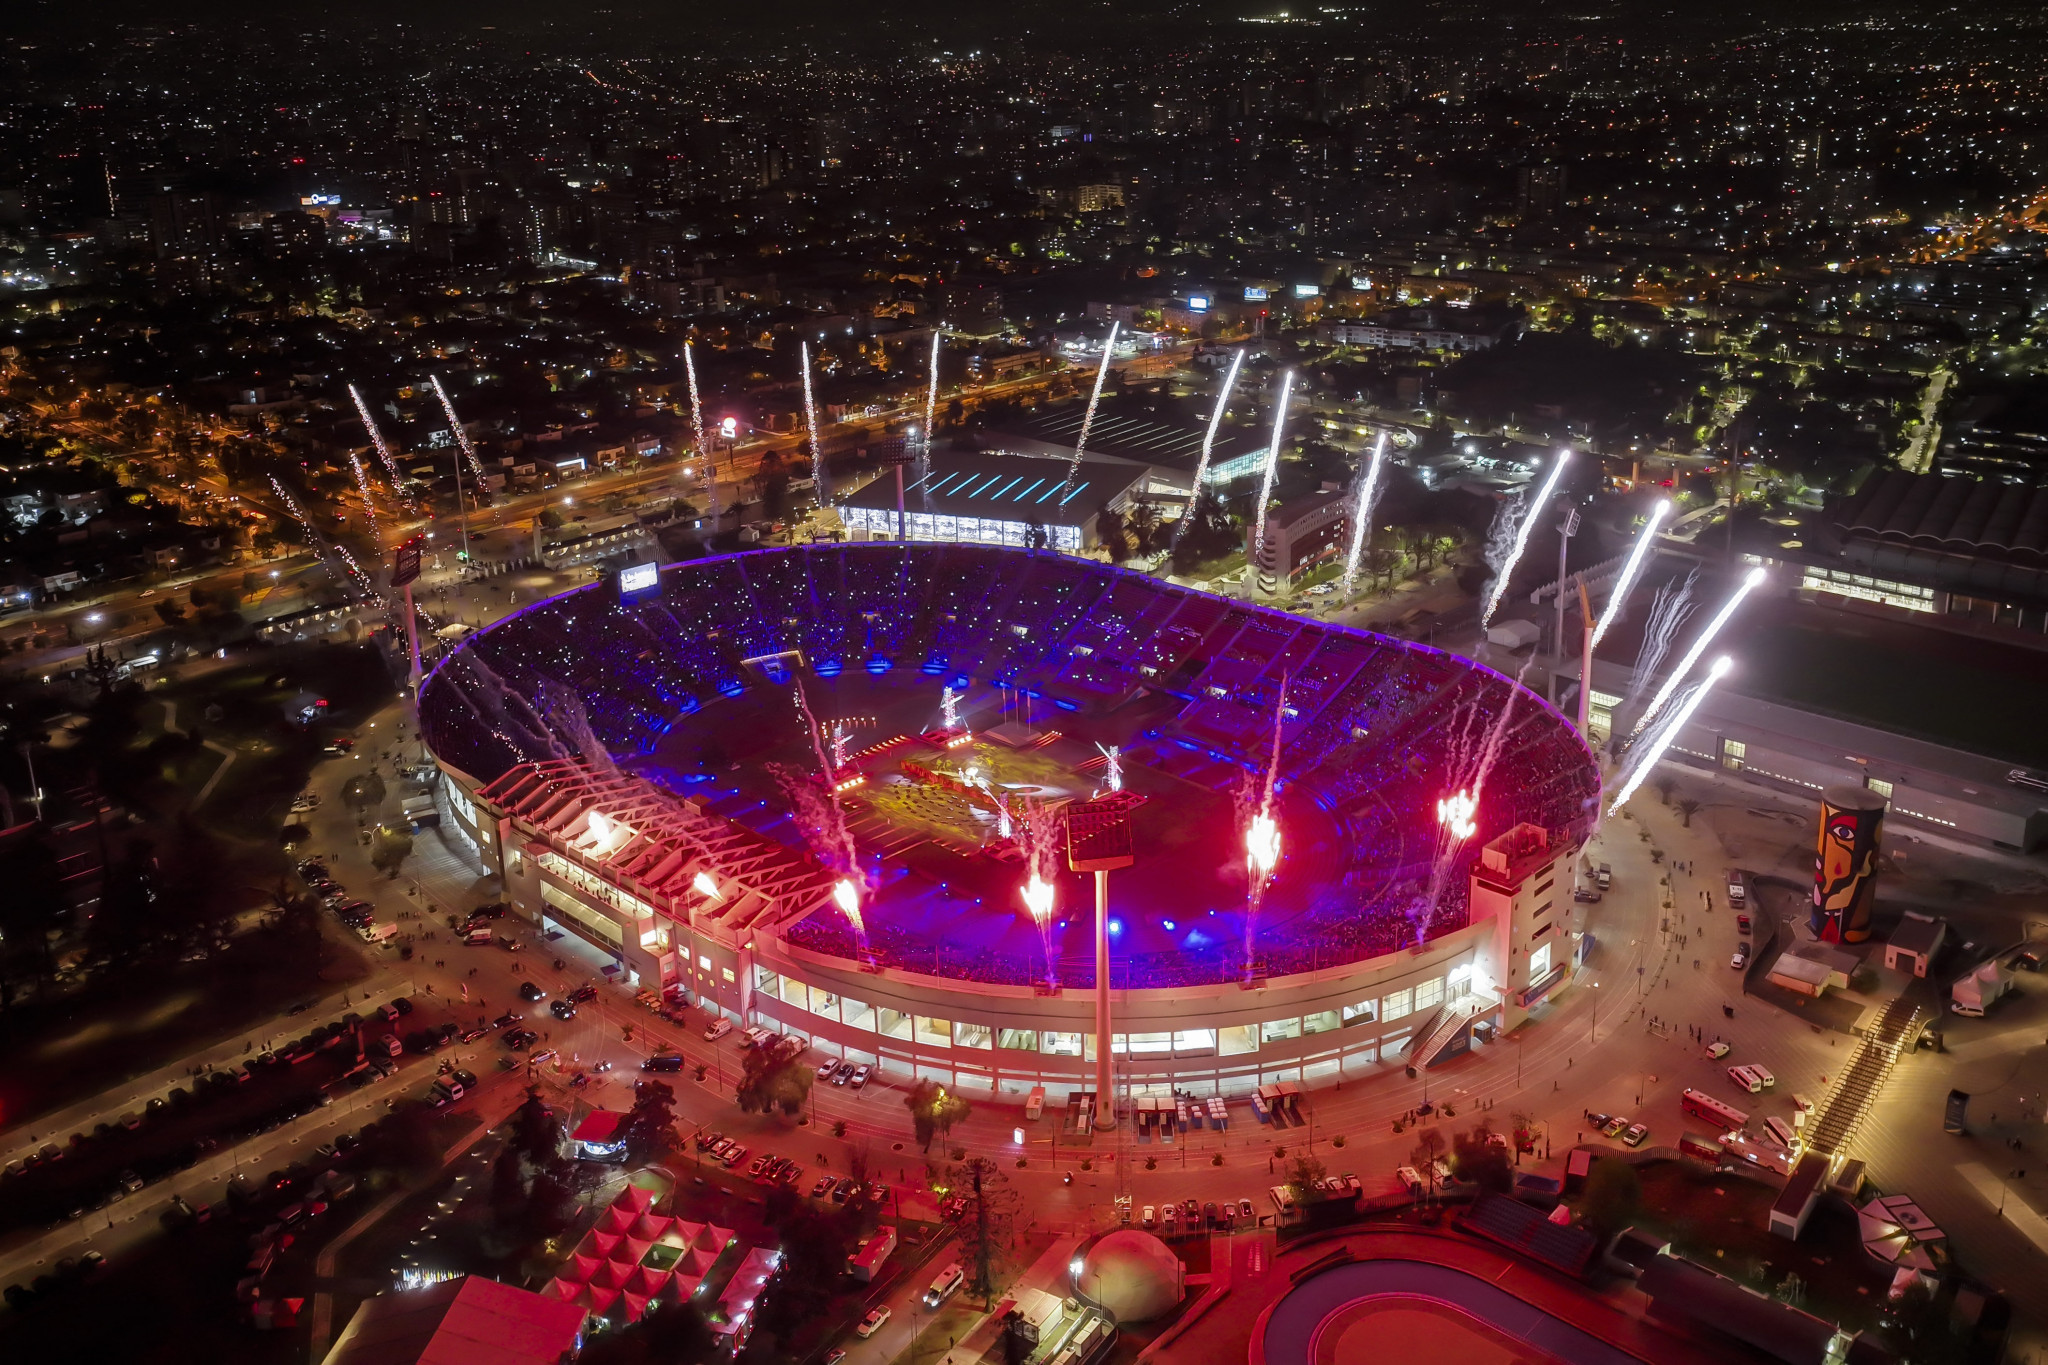 First Pan American Games to be hosted in Chile stages stunning Opening Ceremony